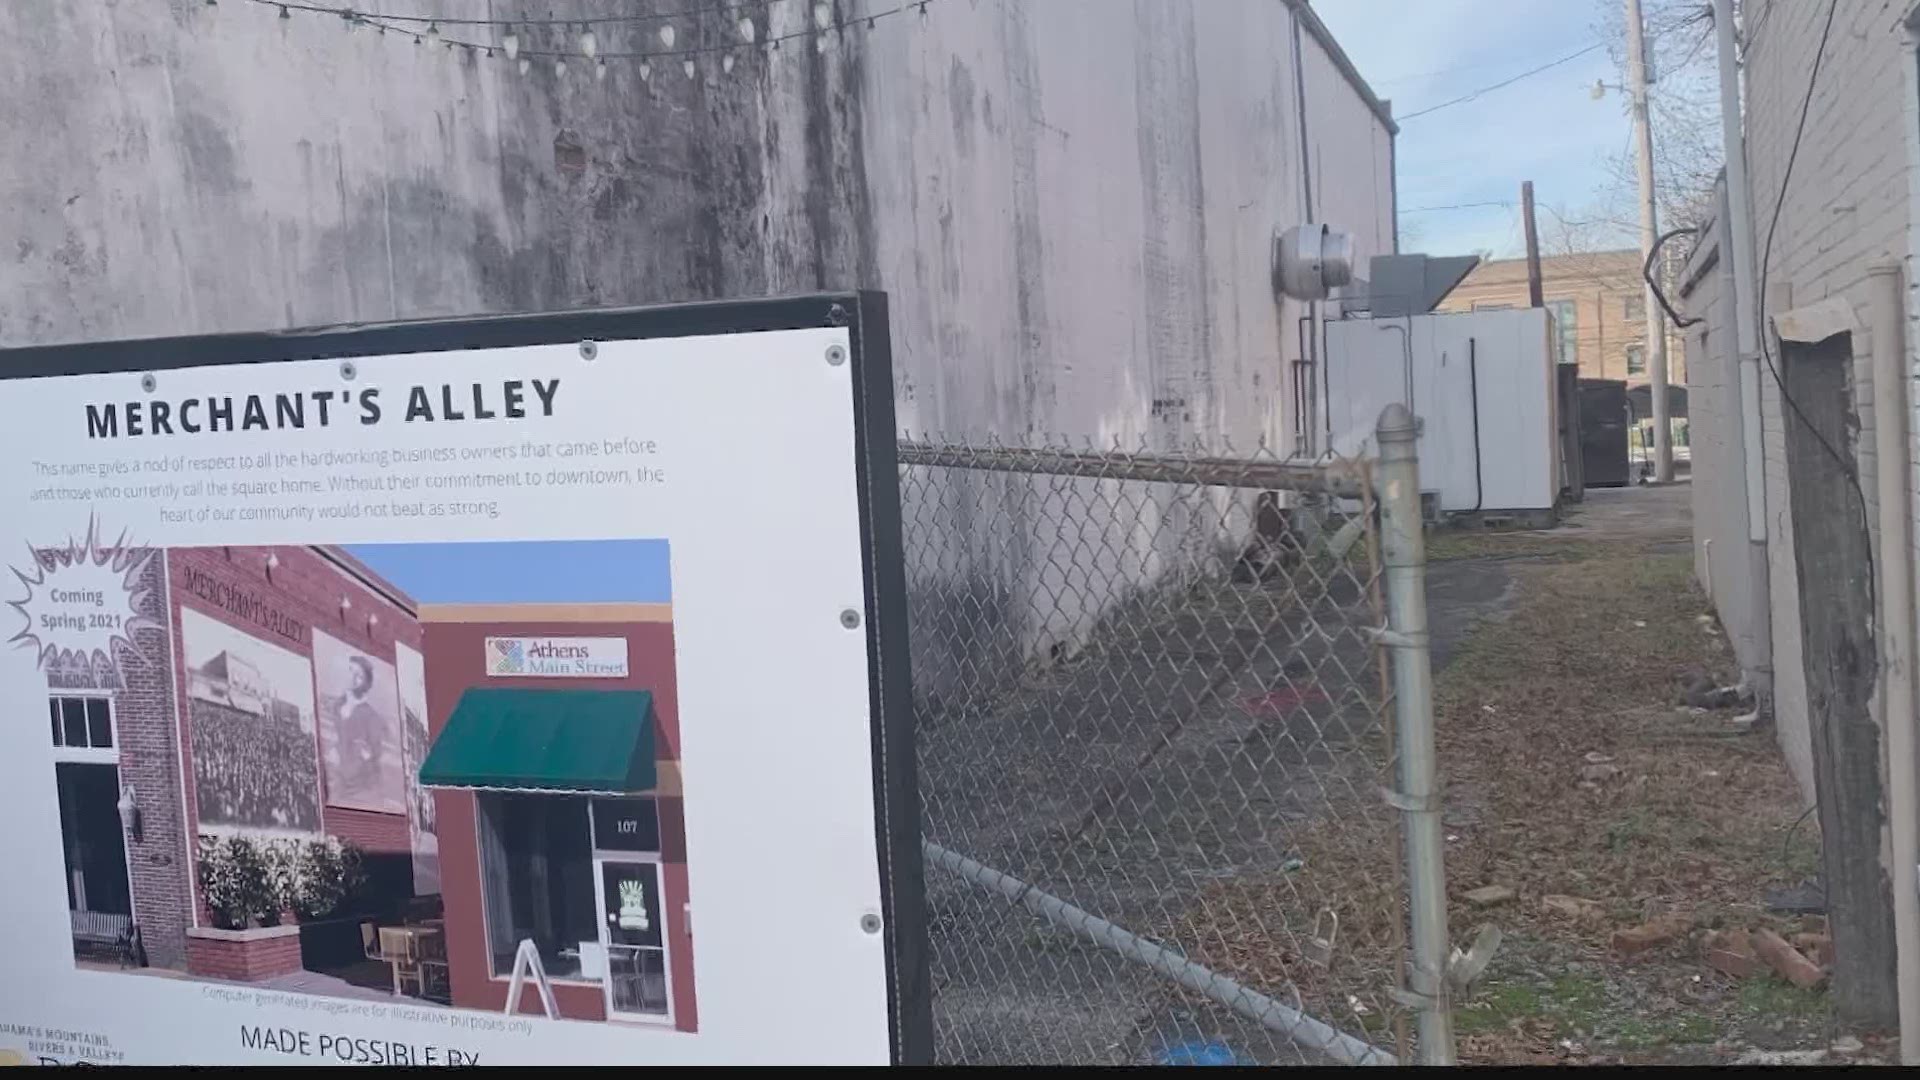 Athens Main Street leaders says they're in the construction phase of "Merchants Alley."